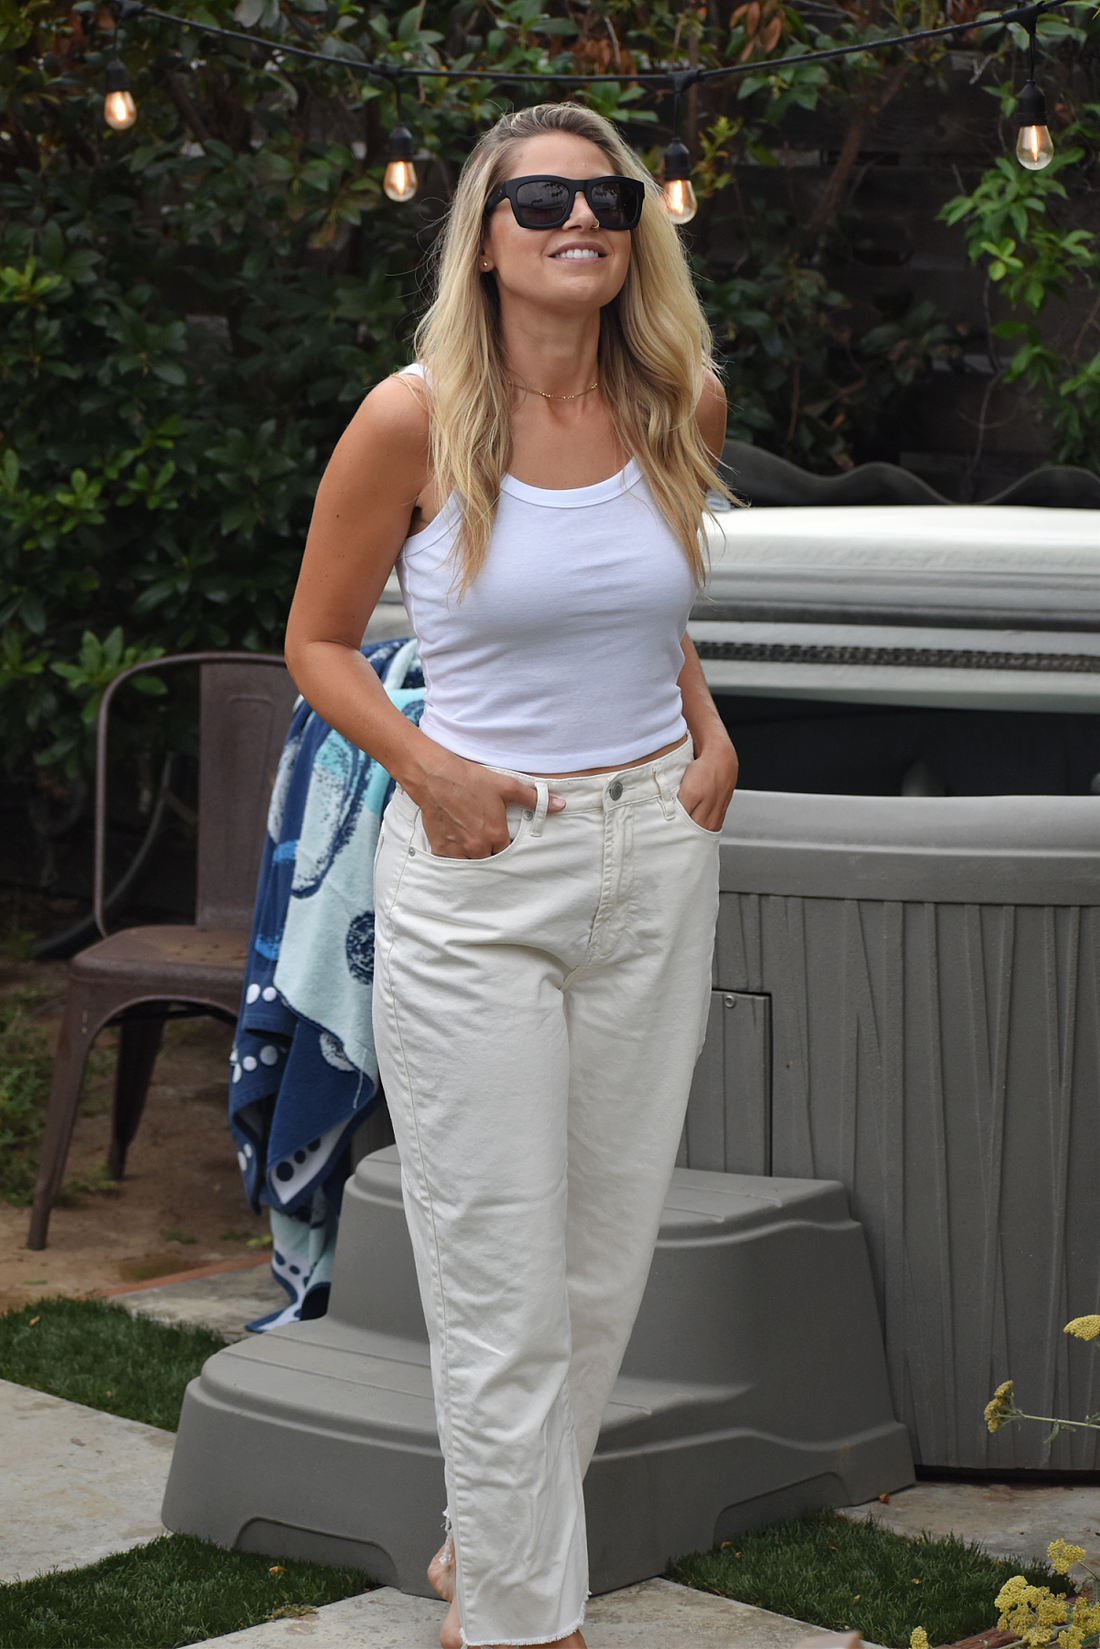 Smiling blonde woman with sunglasses stands near a hot tub wearing a white cami crop top and white jeans. Her hands are in her pockets.